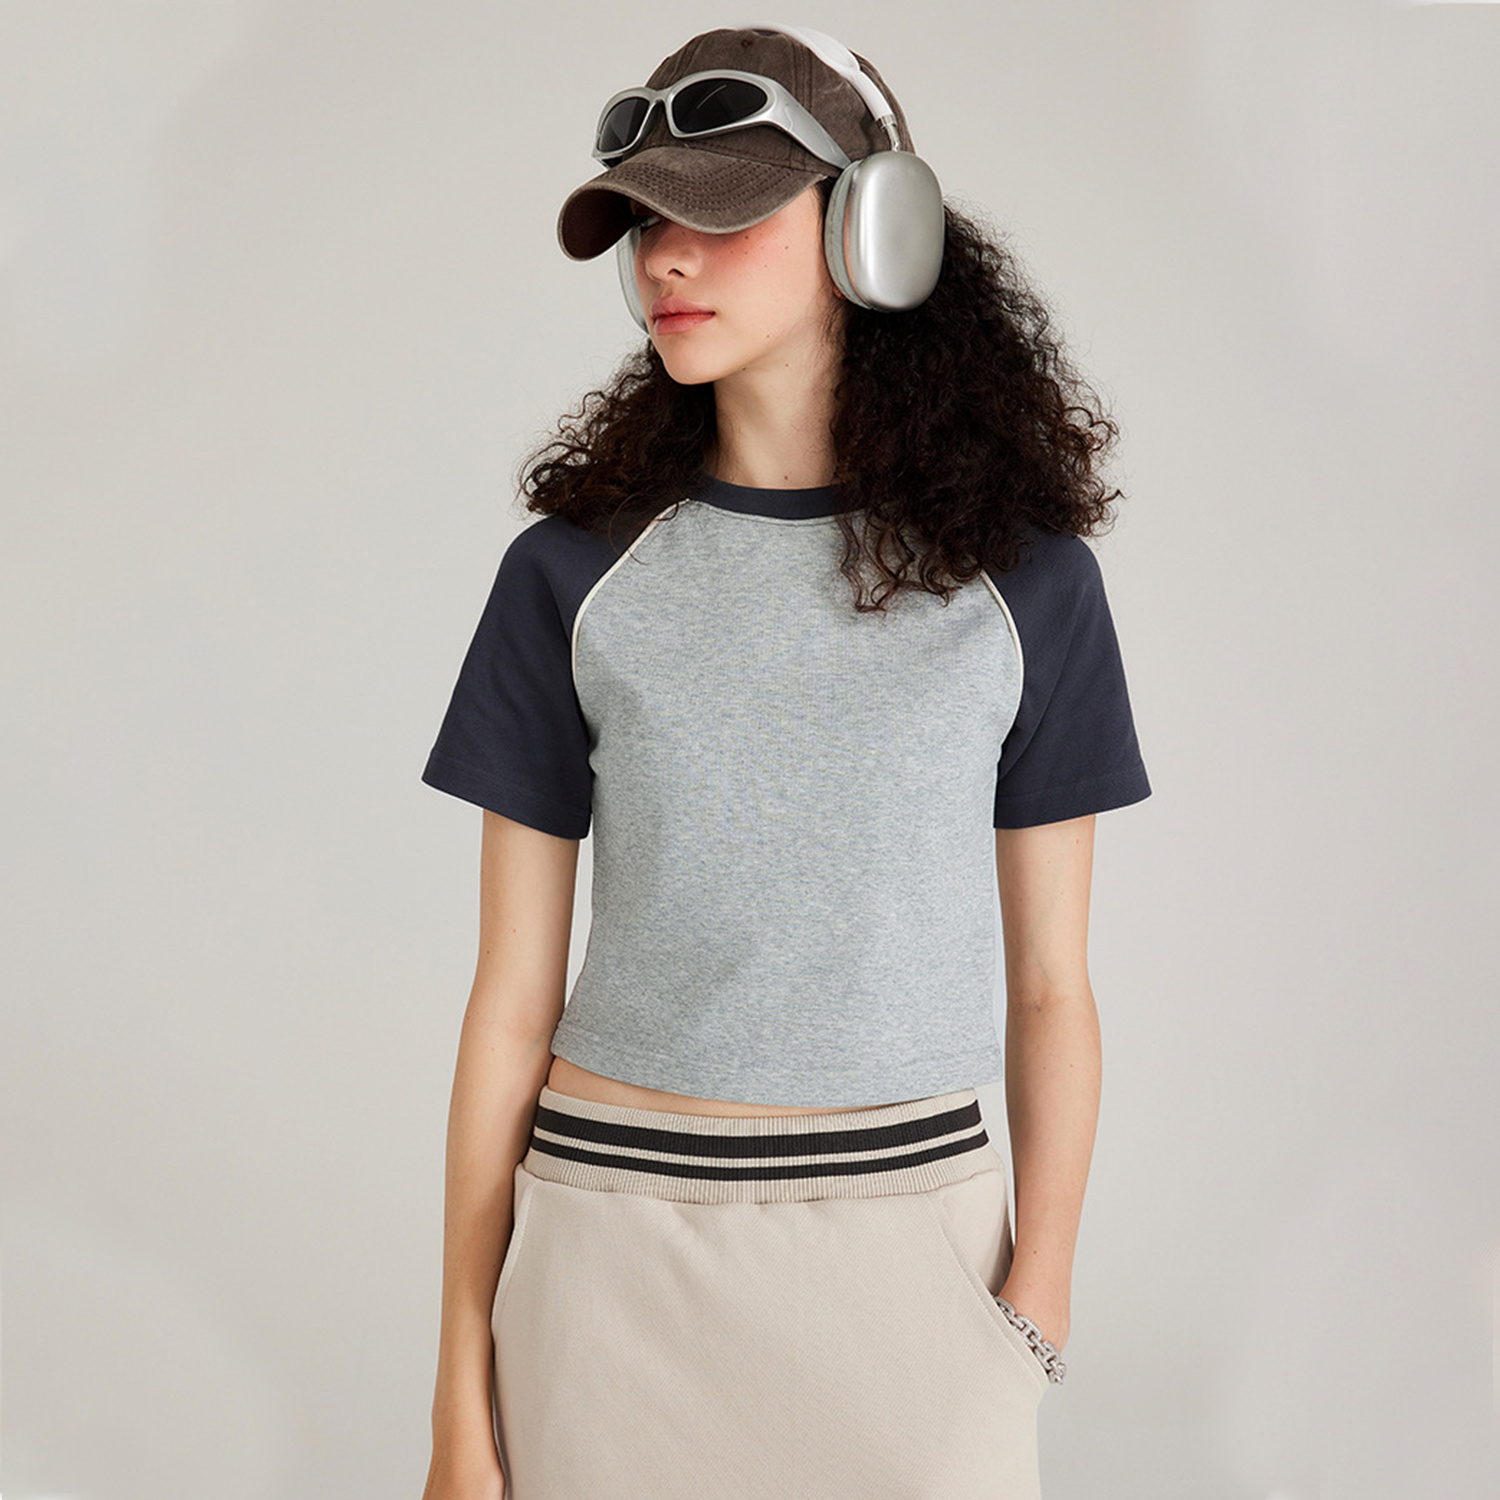 Streetwear Vintage Colorblock Fitted Cropped Gray Tee | HugePOD